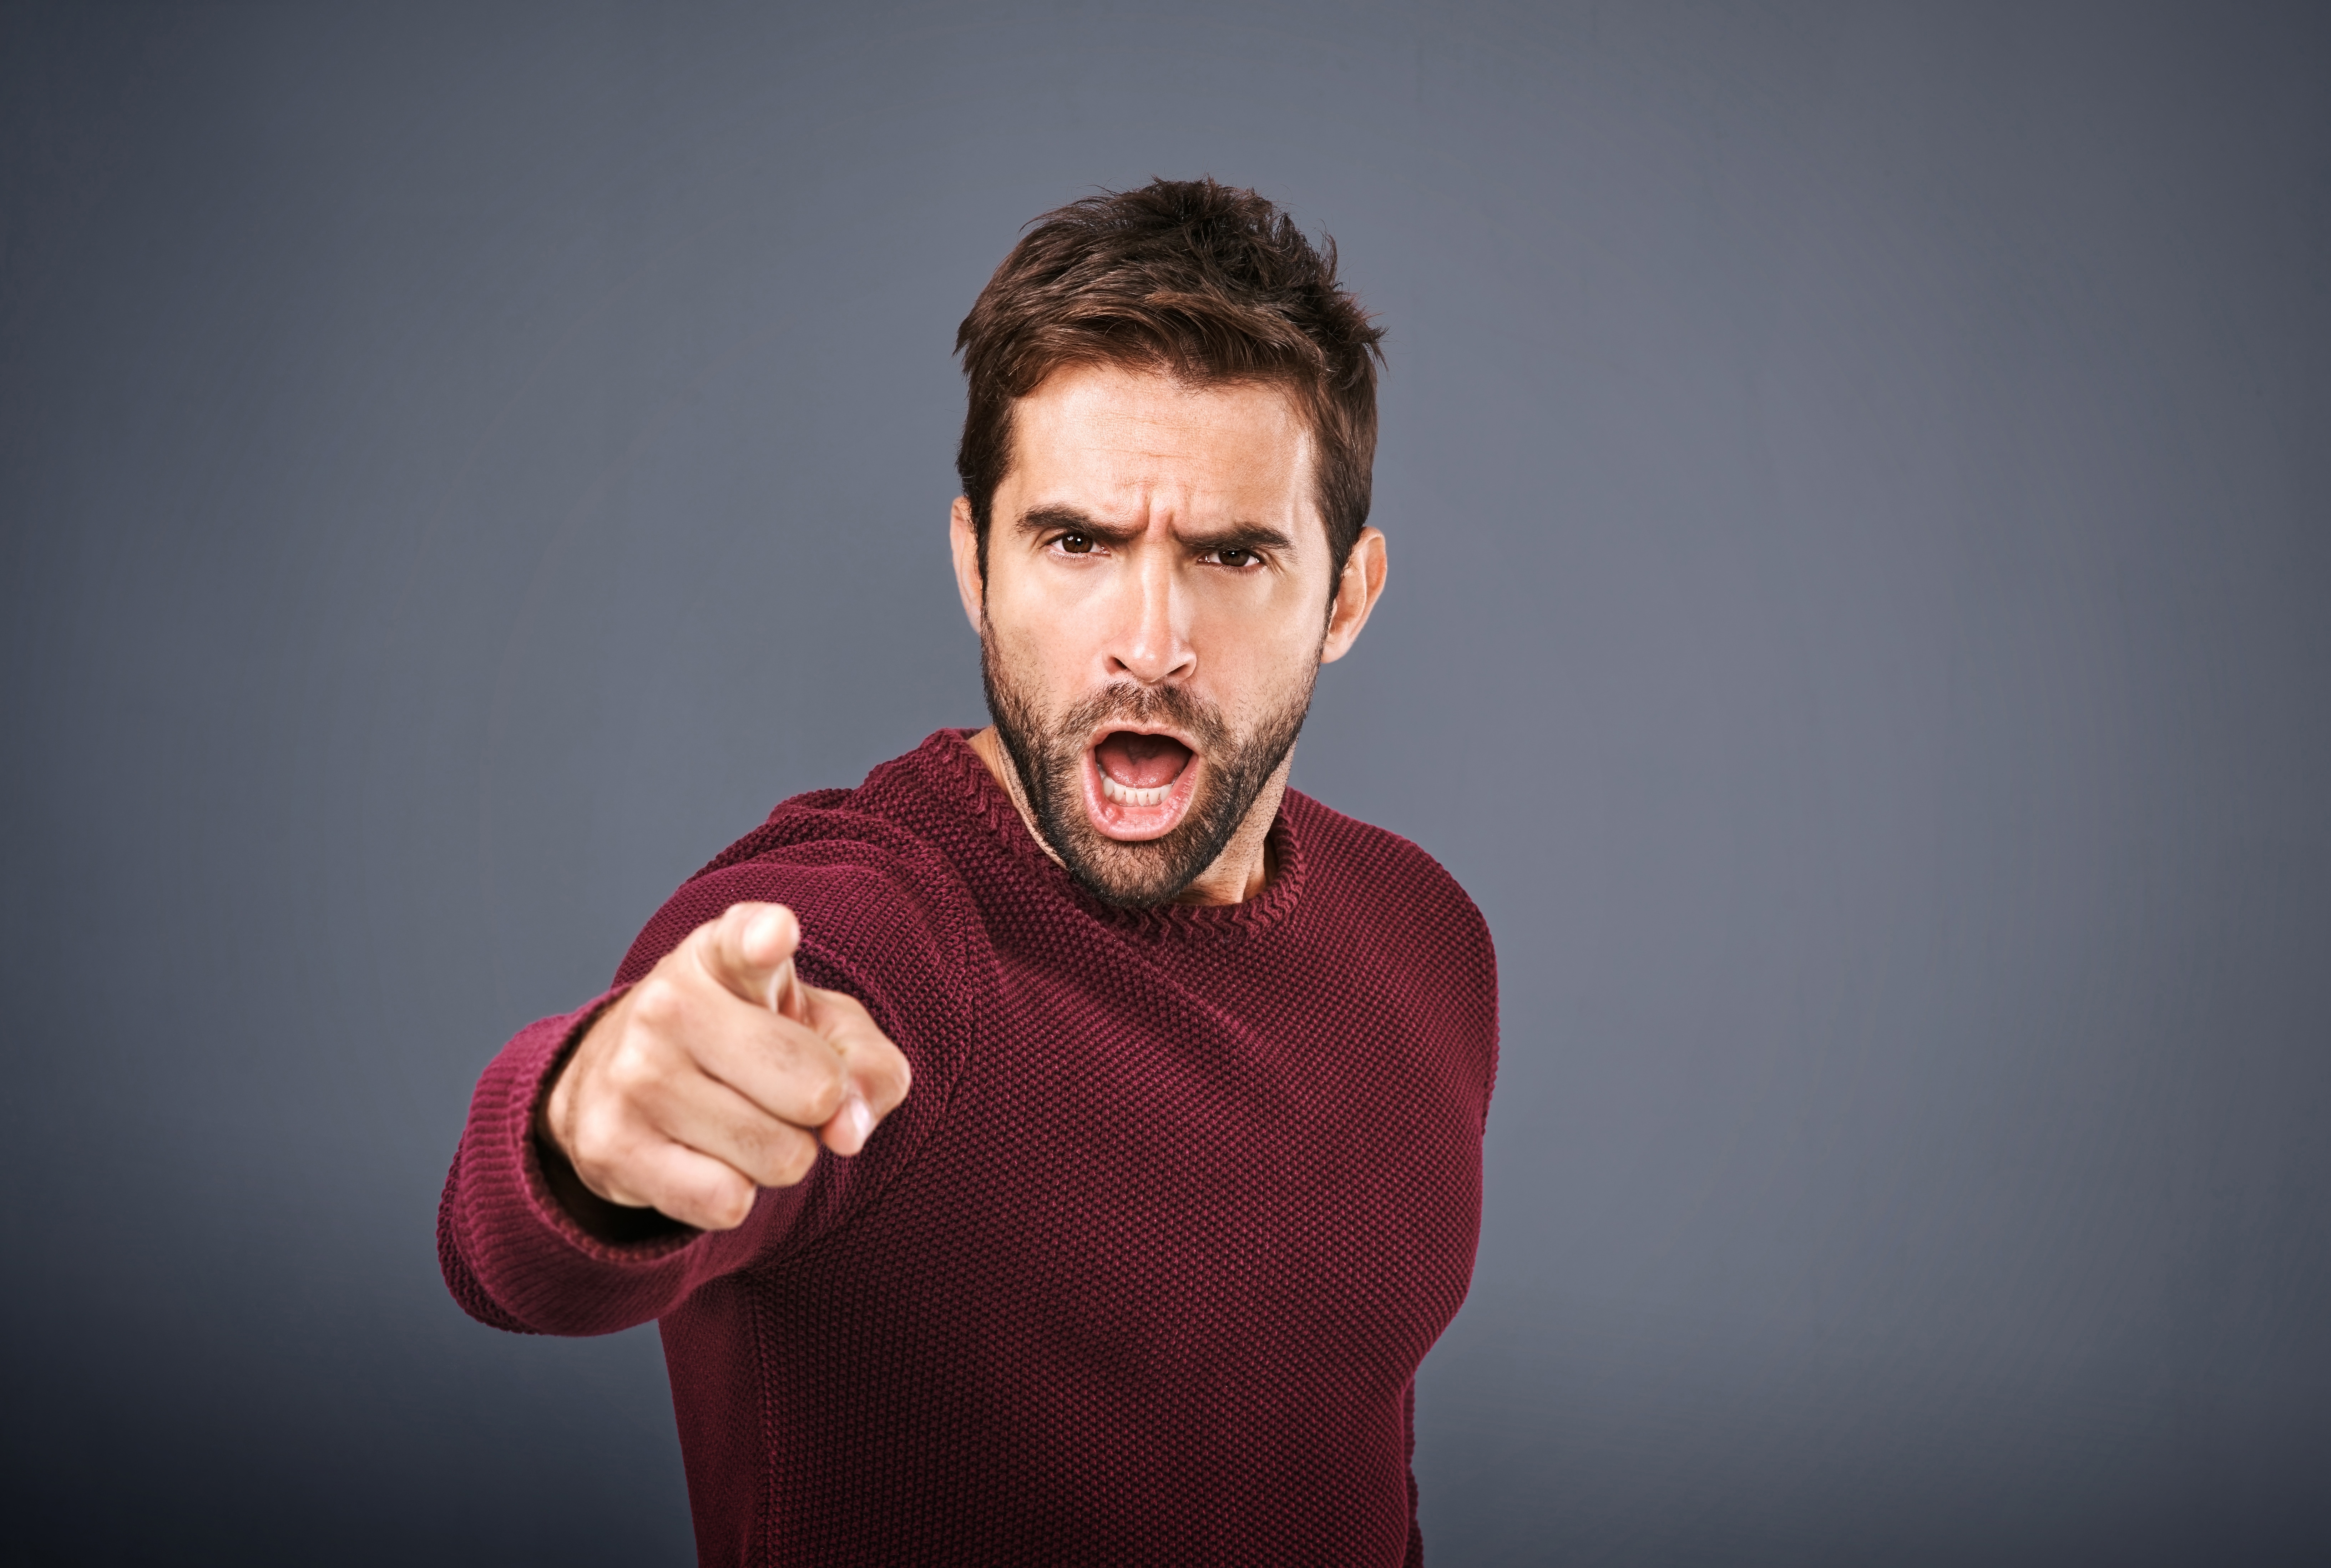 Shot of a man pointing a finger in anger against a gray background. | Source: Shutterstock